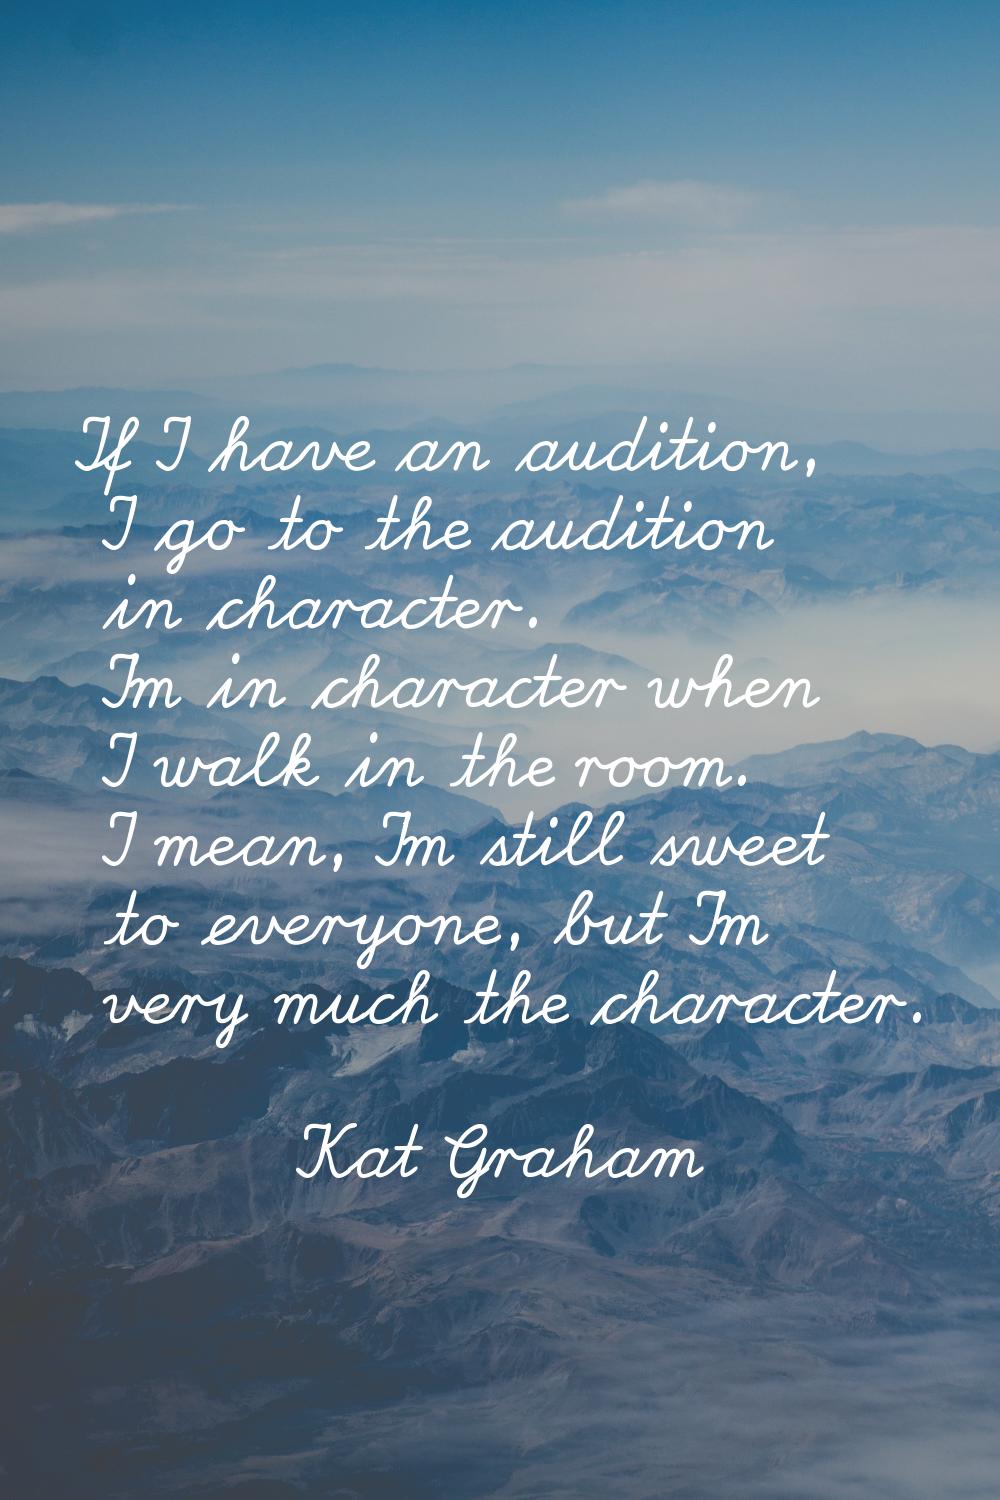 If I have an audition, I go to the audition in character. I'm in character when I walk in the room.